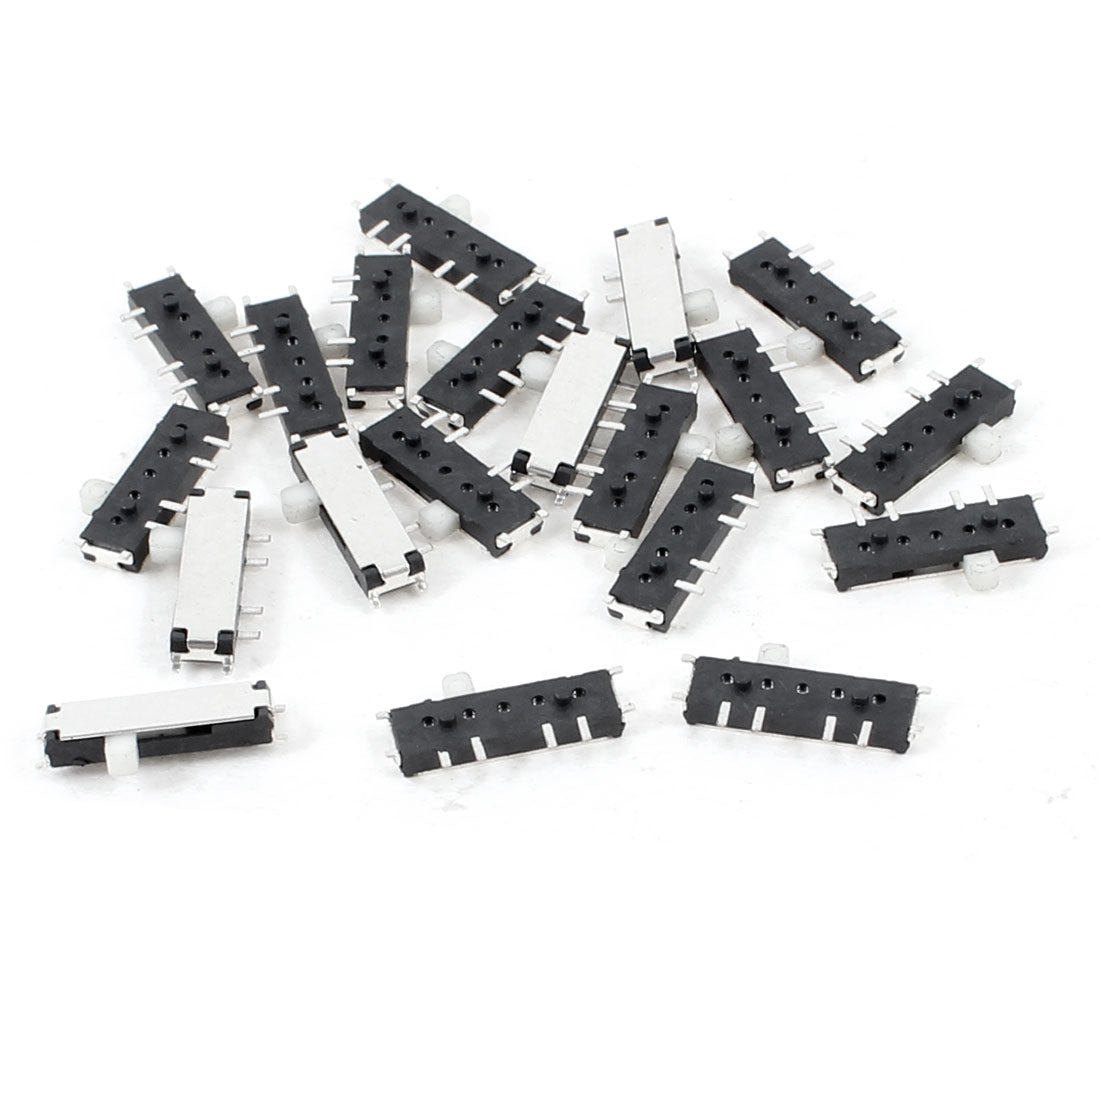 uxcell Uxcell 20 Pcs 3 Position 8 Pin Horizontal Mini Surface Mounted Devices SMT Slide Switch 10mm x 3mm